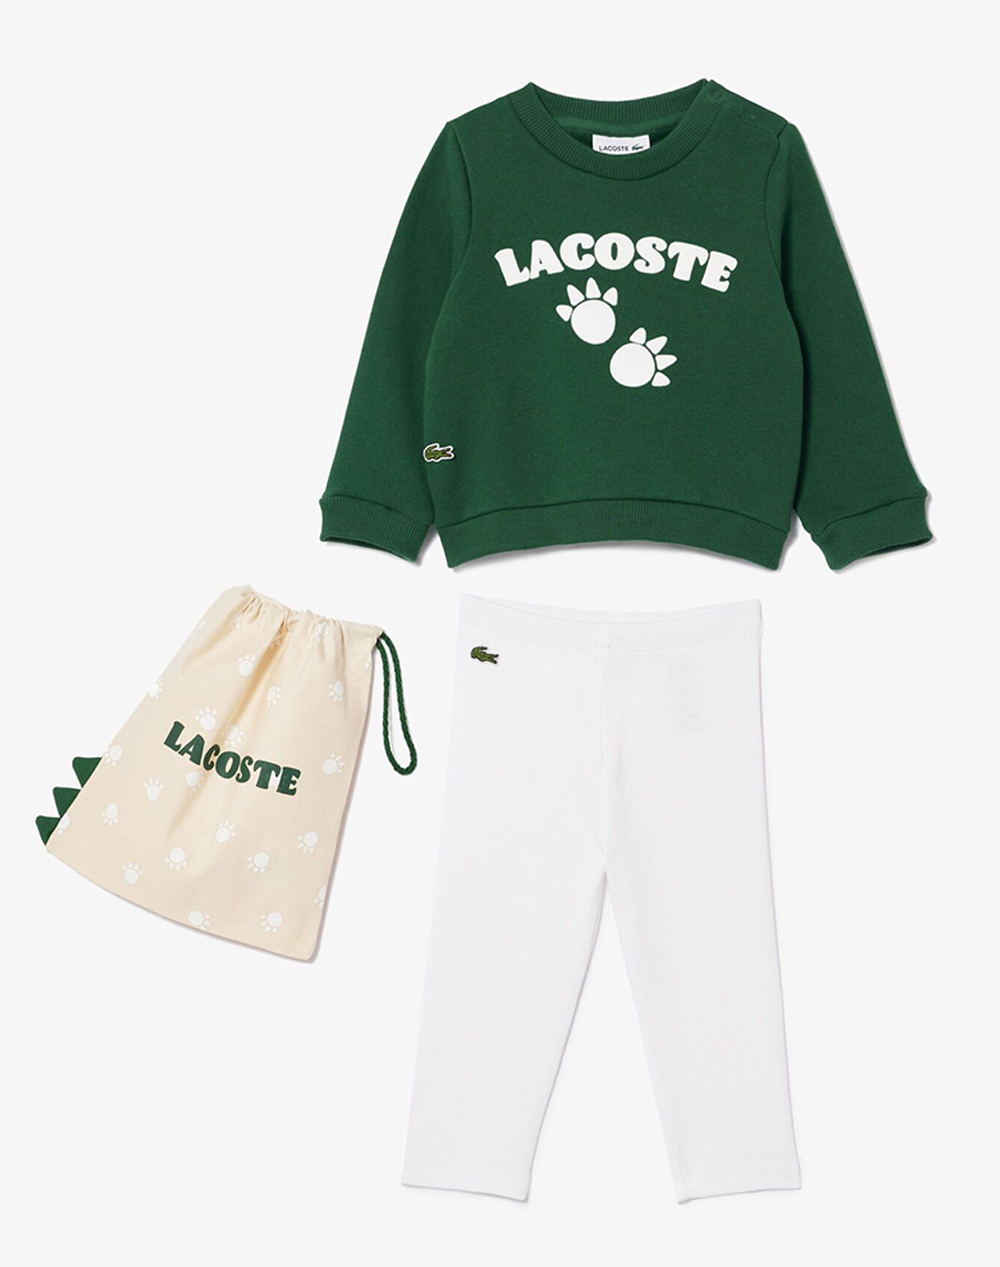 LACOSTE ΒΡΕΦΙΚΟ ΣΕΤ ΔΩΡΟΥ CHILDREN GIFT OUTFIT 34J8509-291 Green 3832BLACO4400005_XR21443